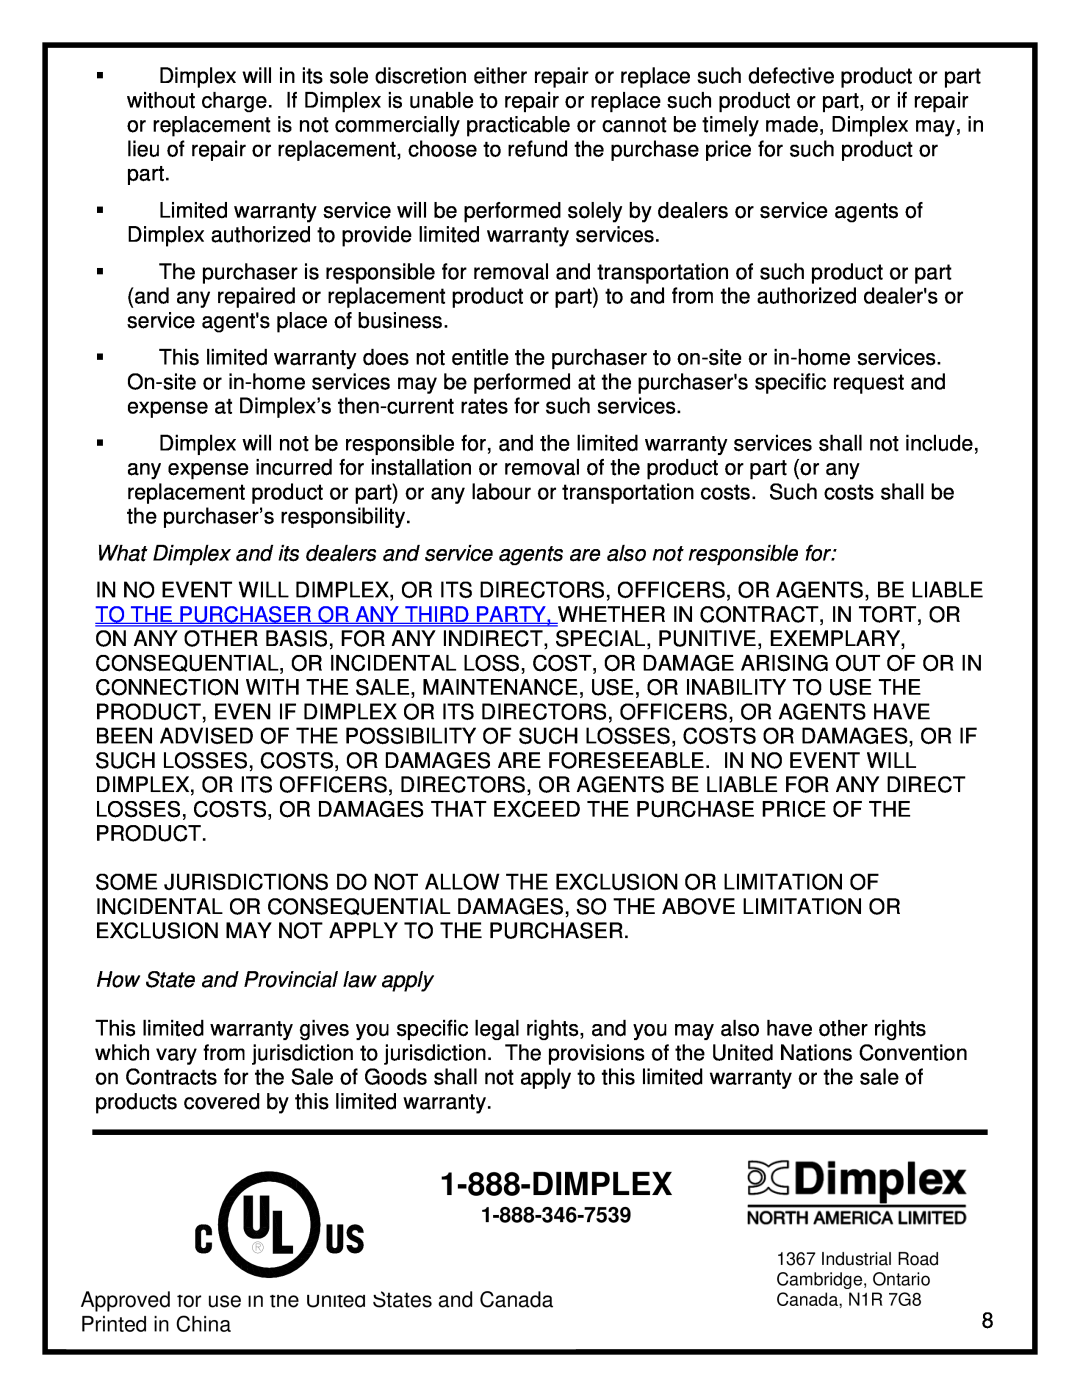 Dimplex DS5629 manual Dimplex, How State and Provincial law apply, 1-888-346-7539 